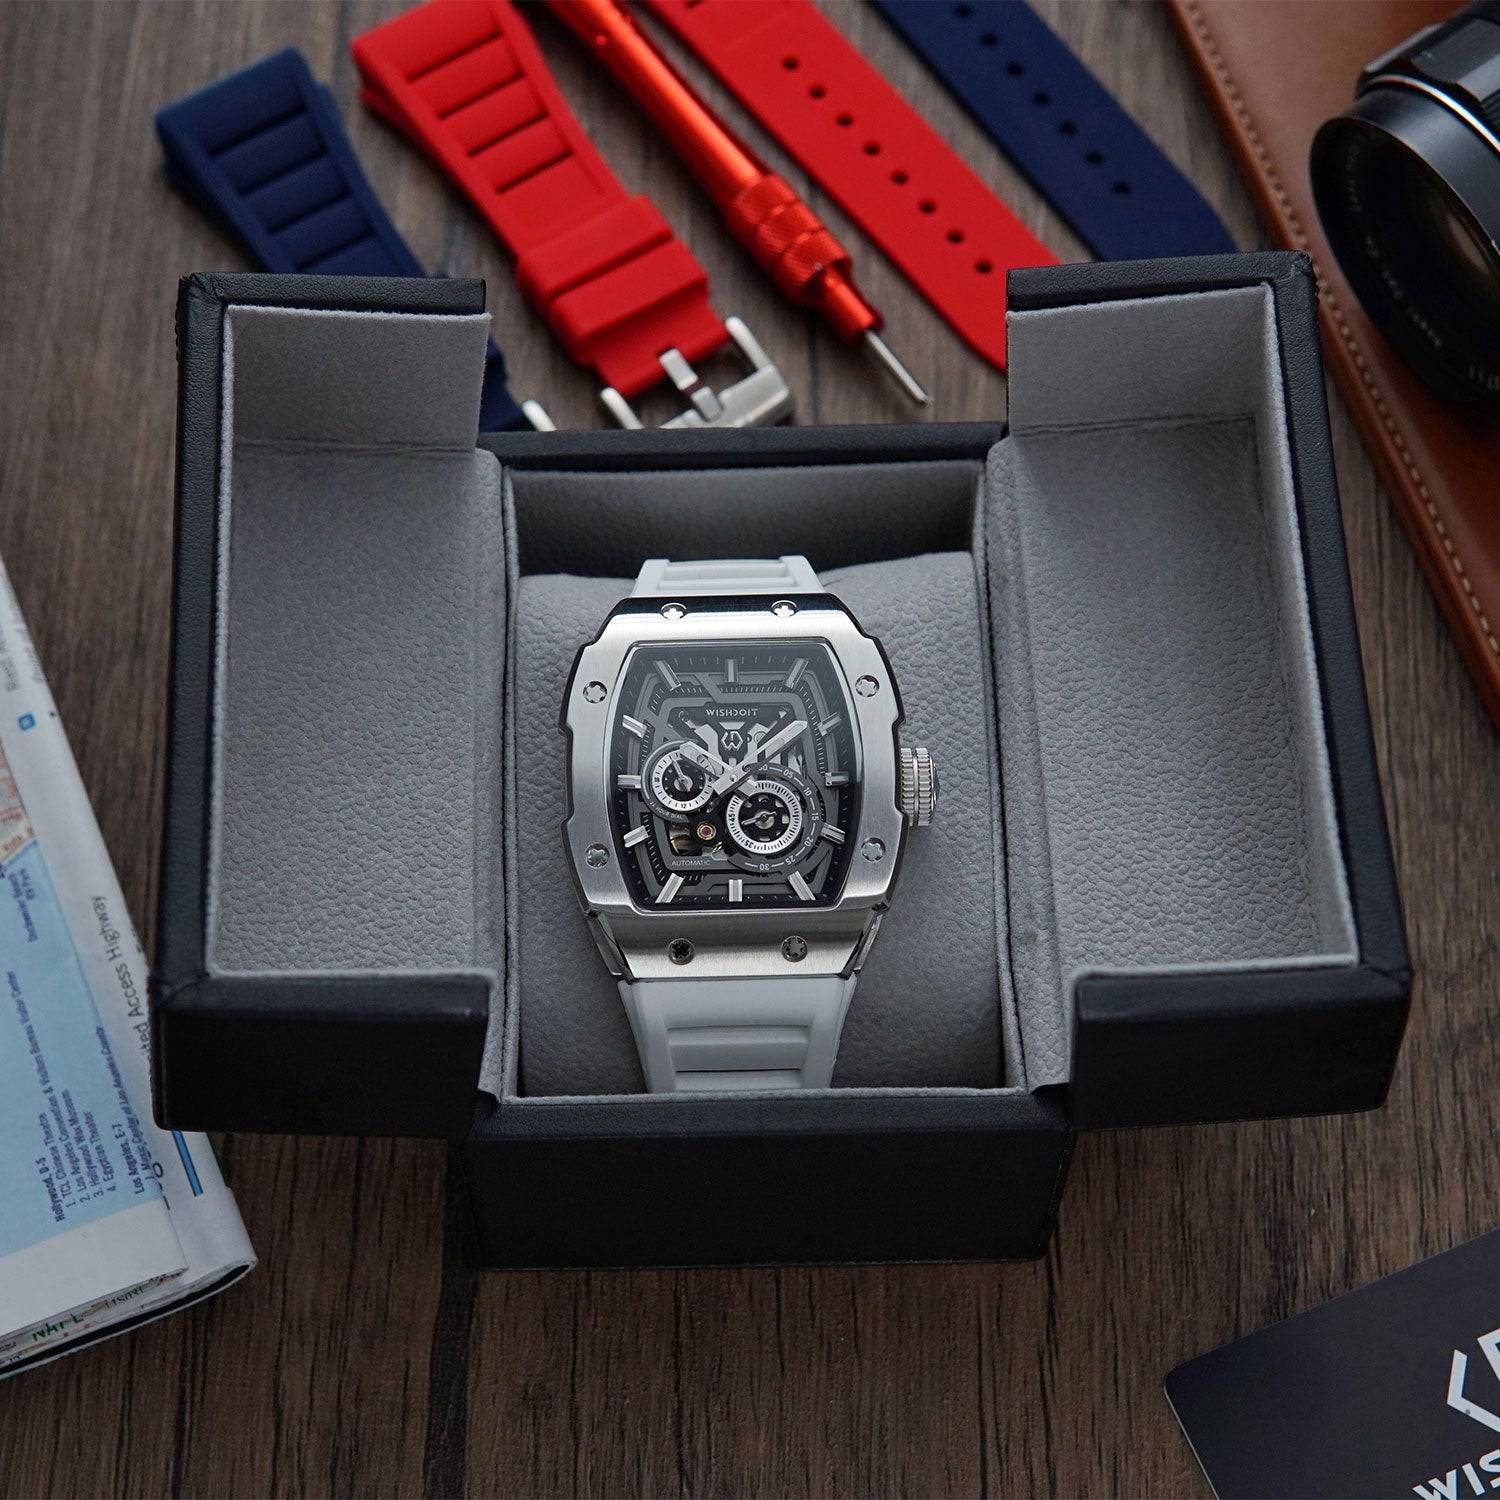 wishdoit-watches-full-speed-mechanical-watches-for-men-silvery-black